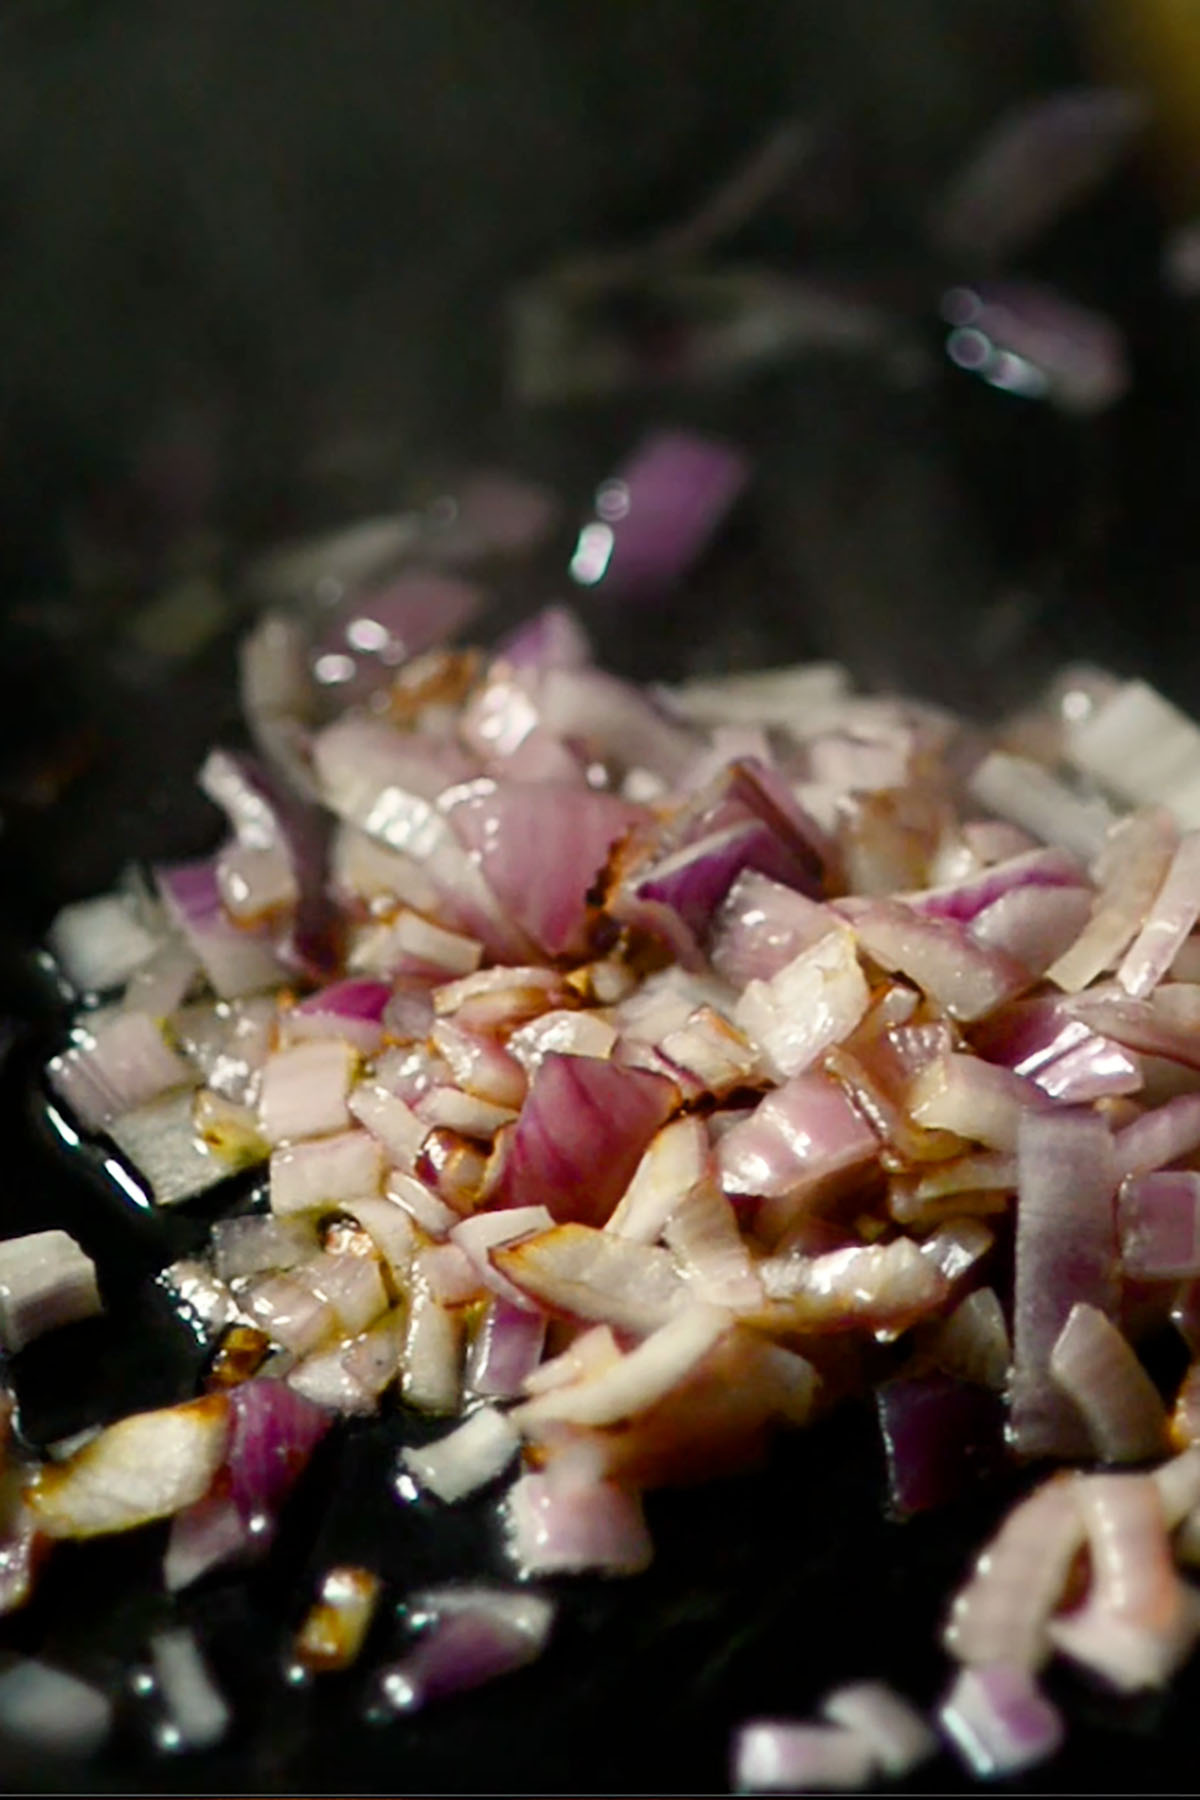 Red onions sautéing in butter in a cast iron skillet.